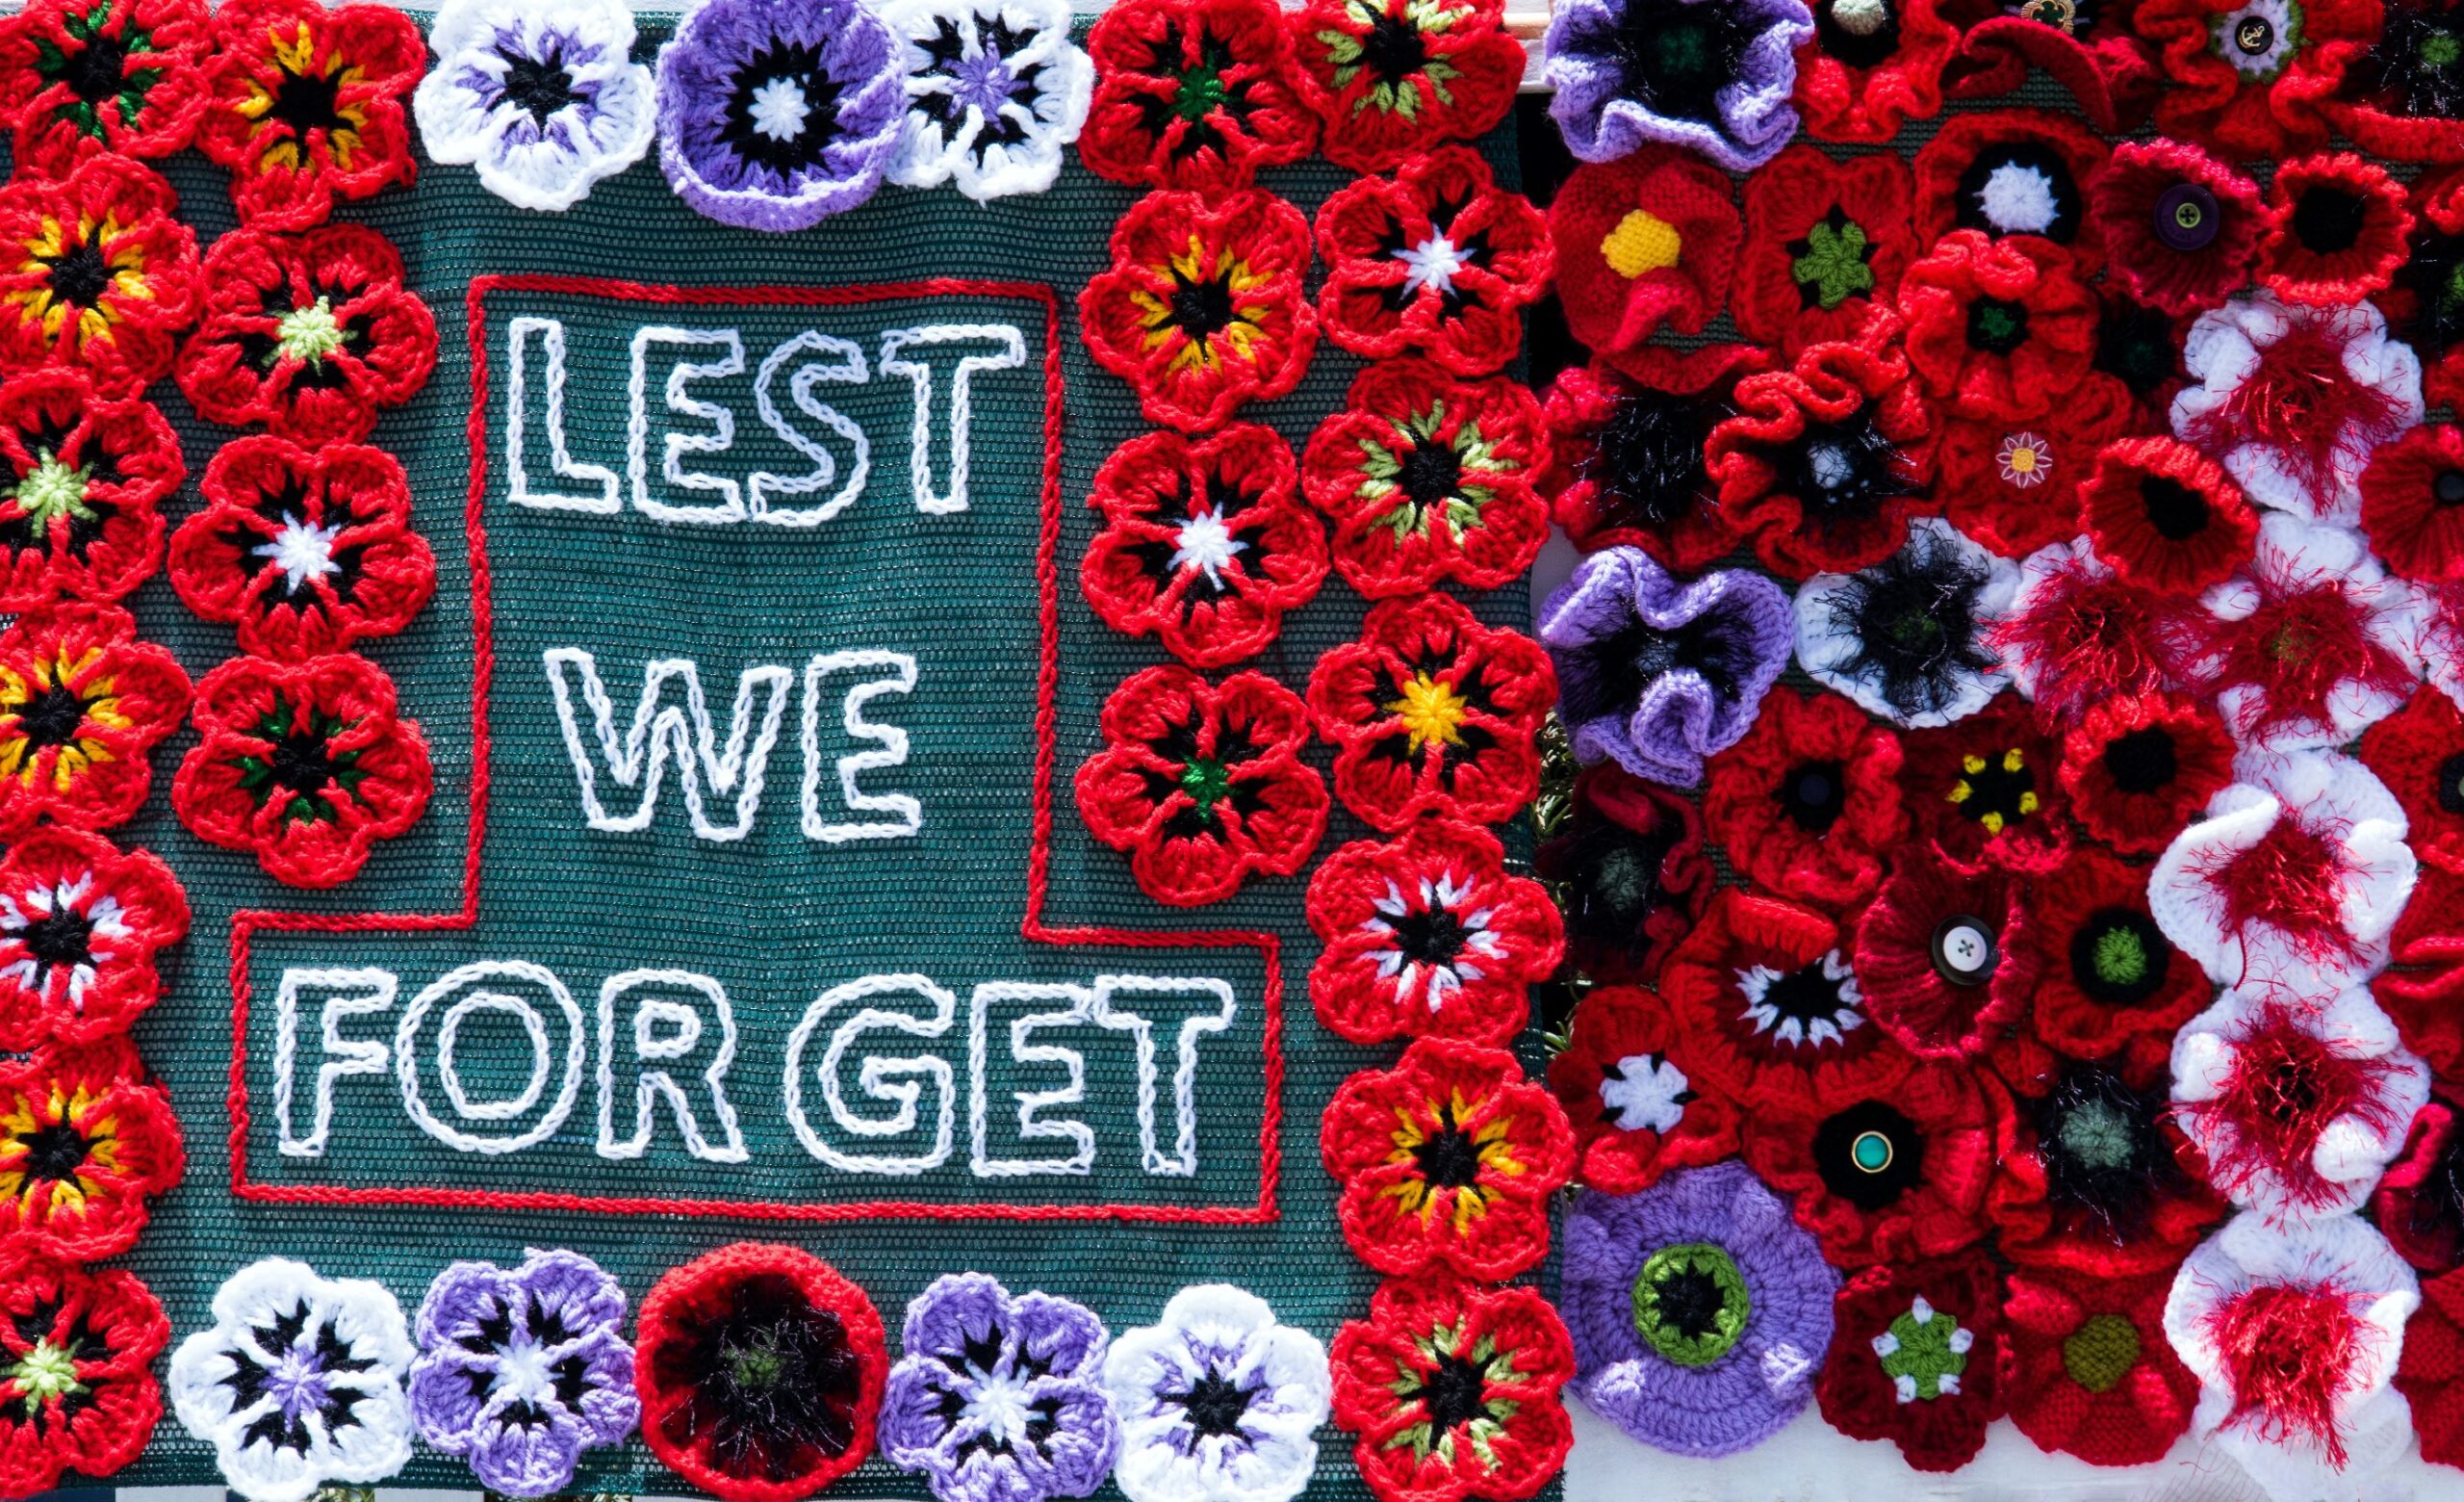 Photo of knit poppies with stitching that says "Lest We Forget".